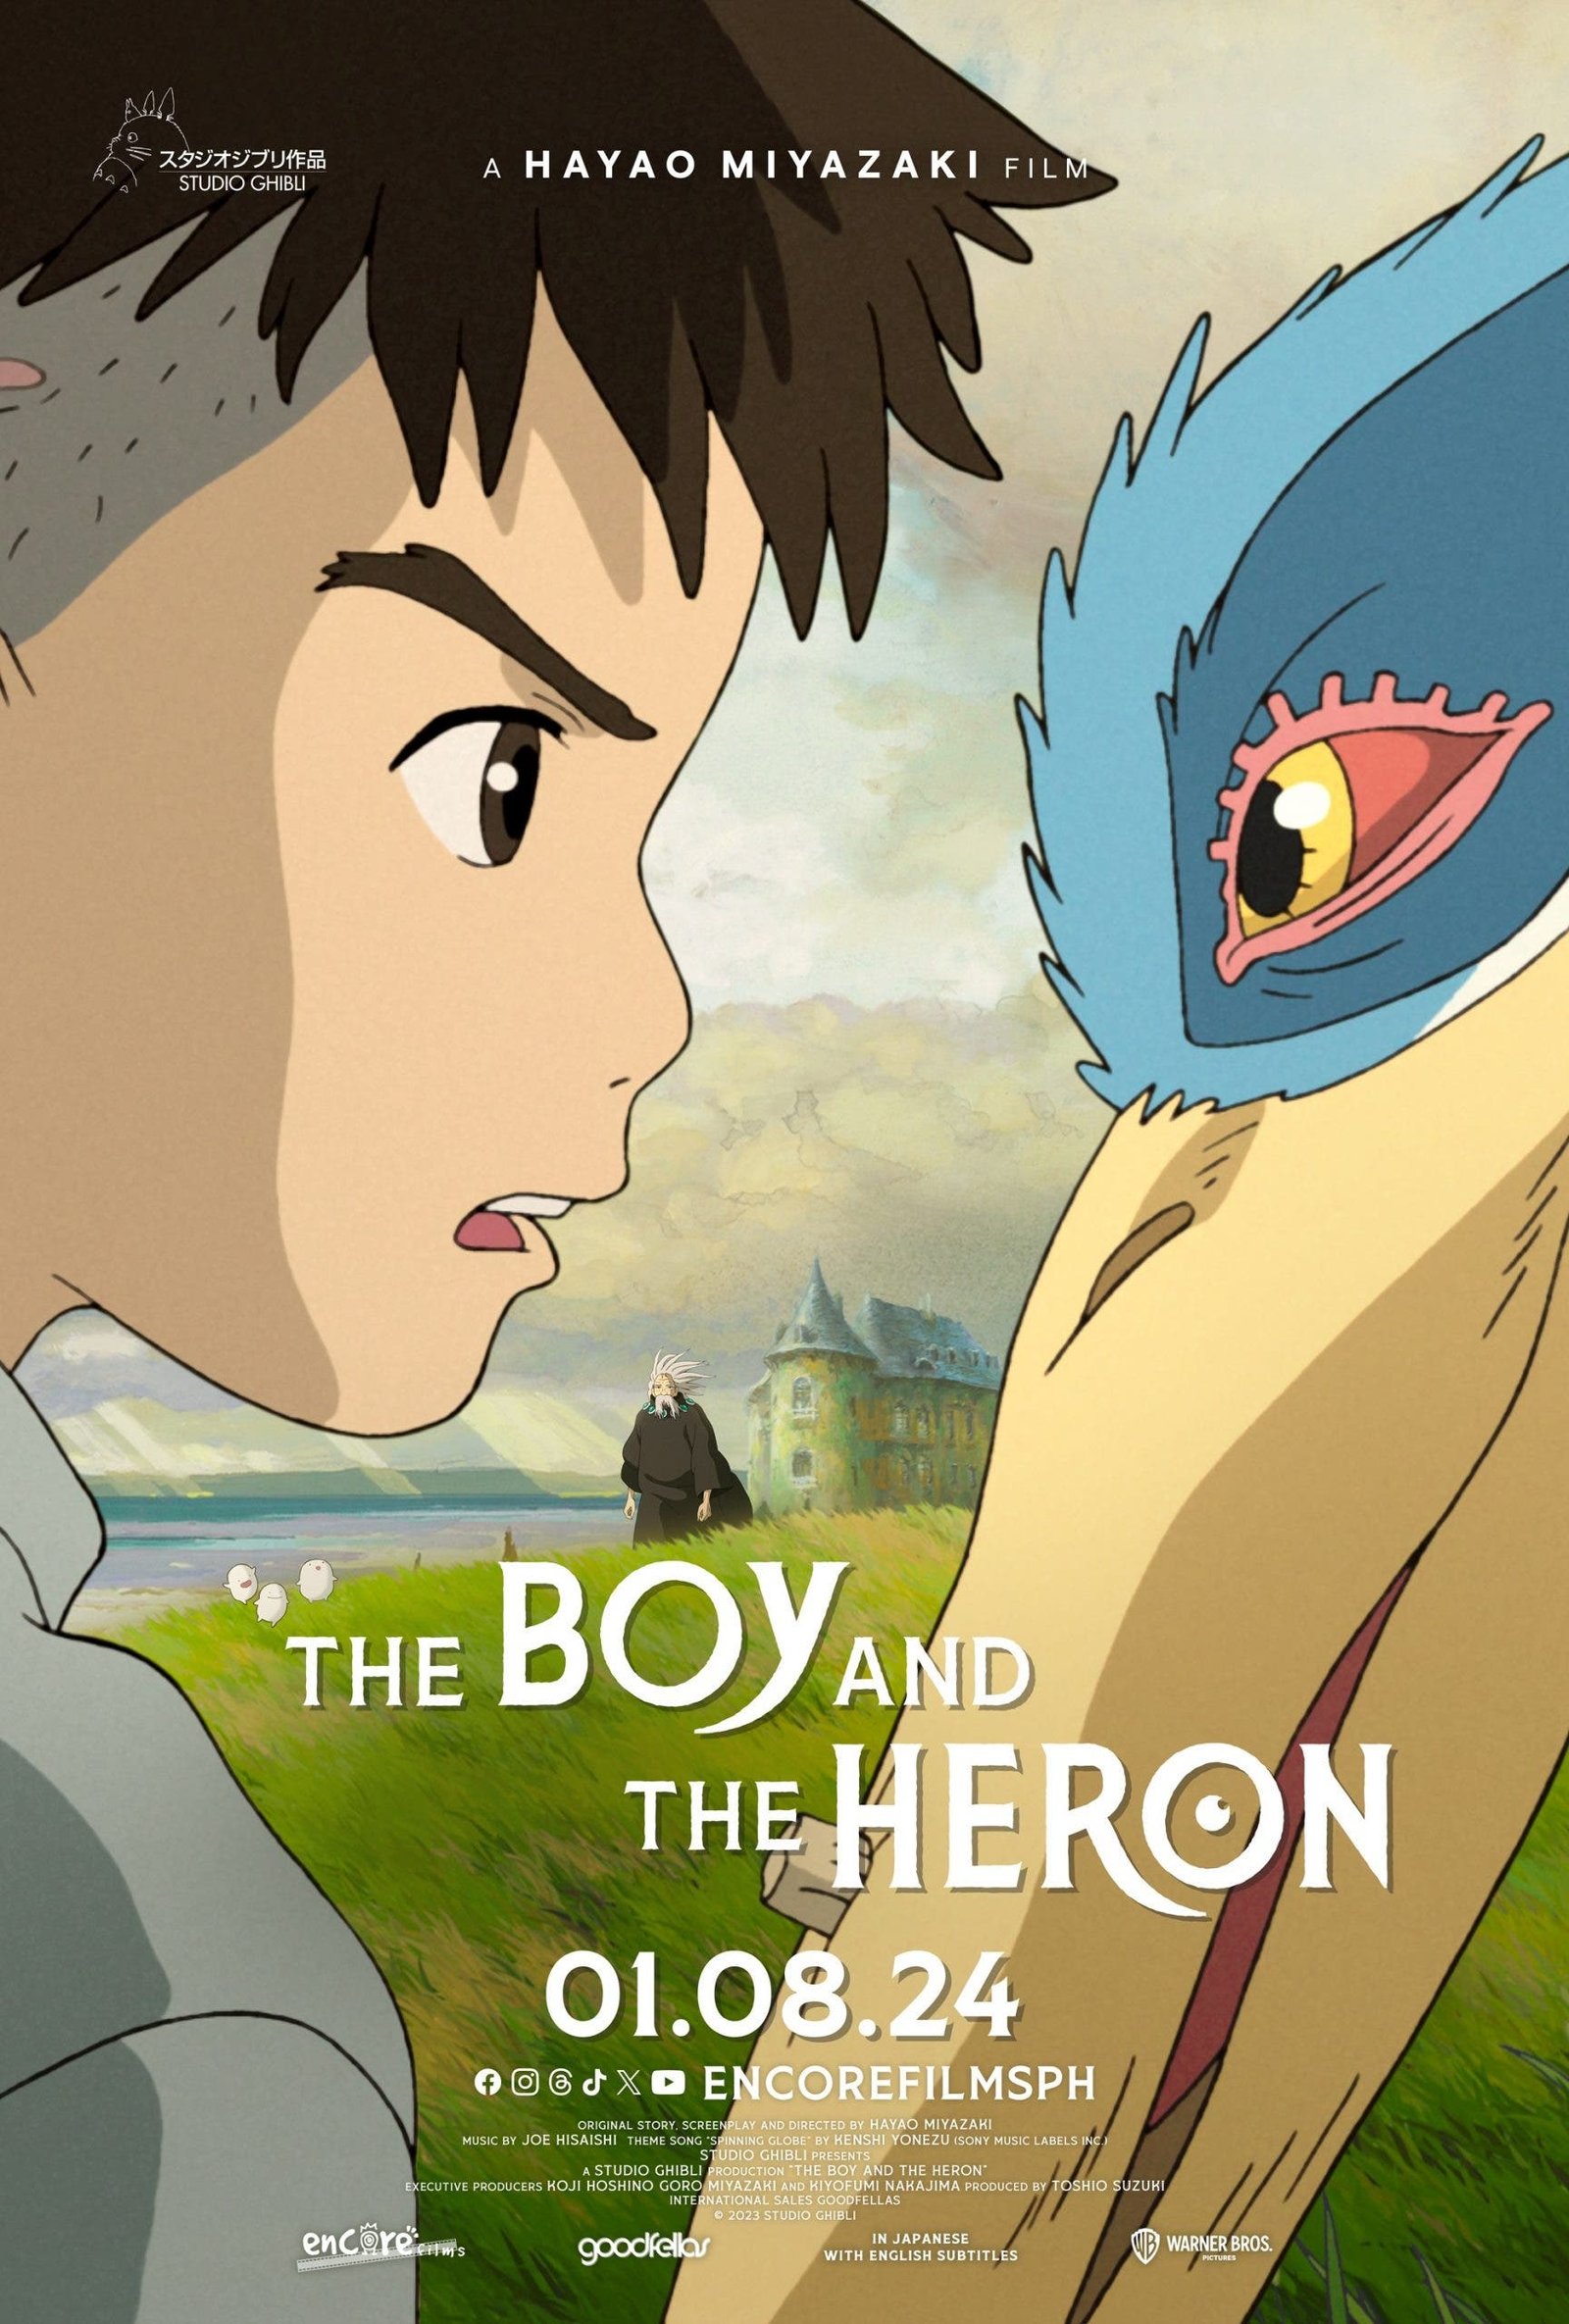 English Dubbed Versions of The Boy and the Heron Available in PH Cinemas on Jan 8